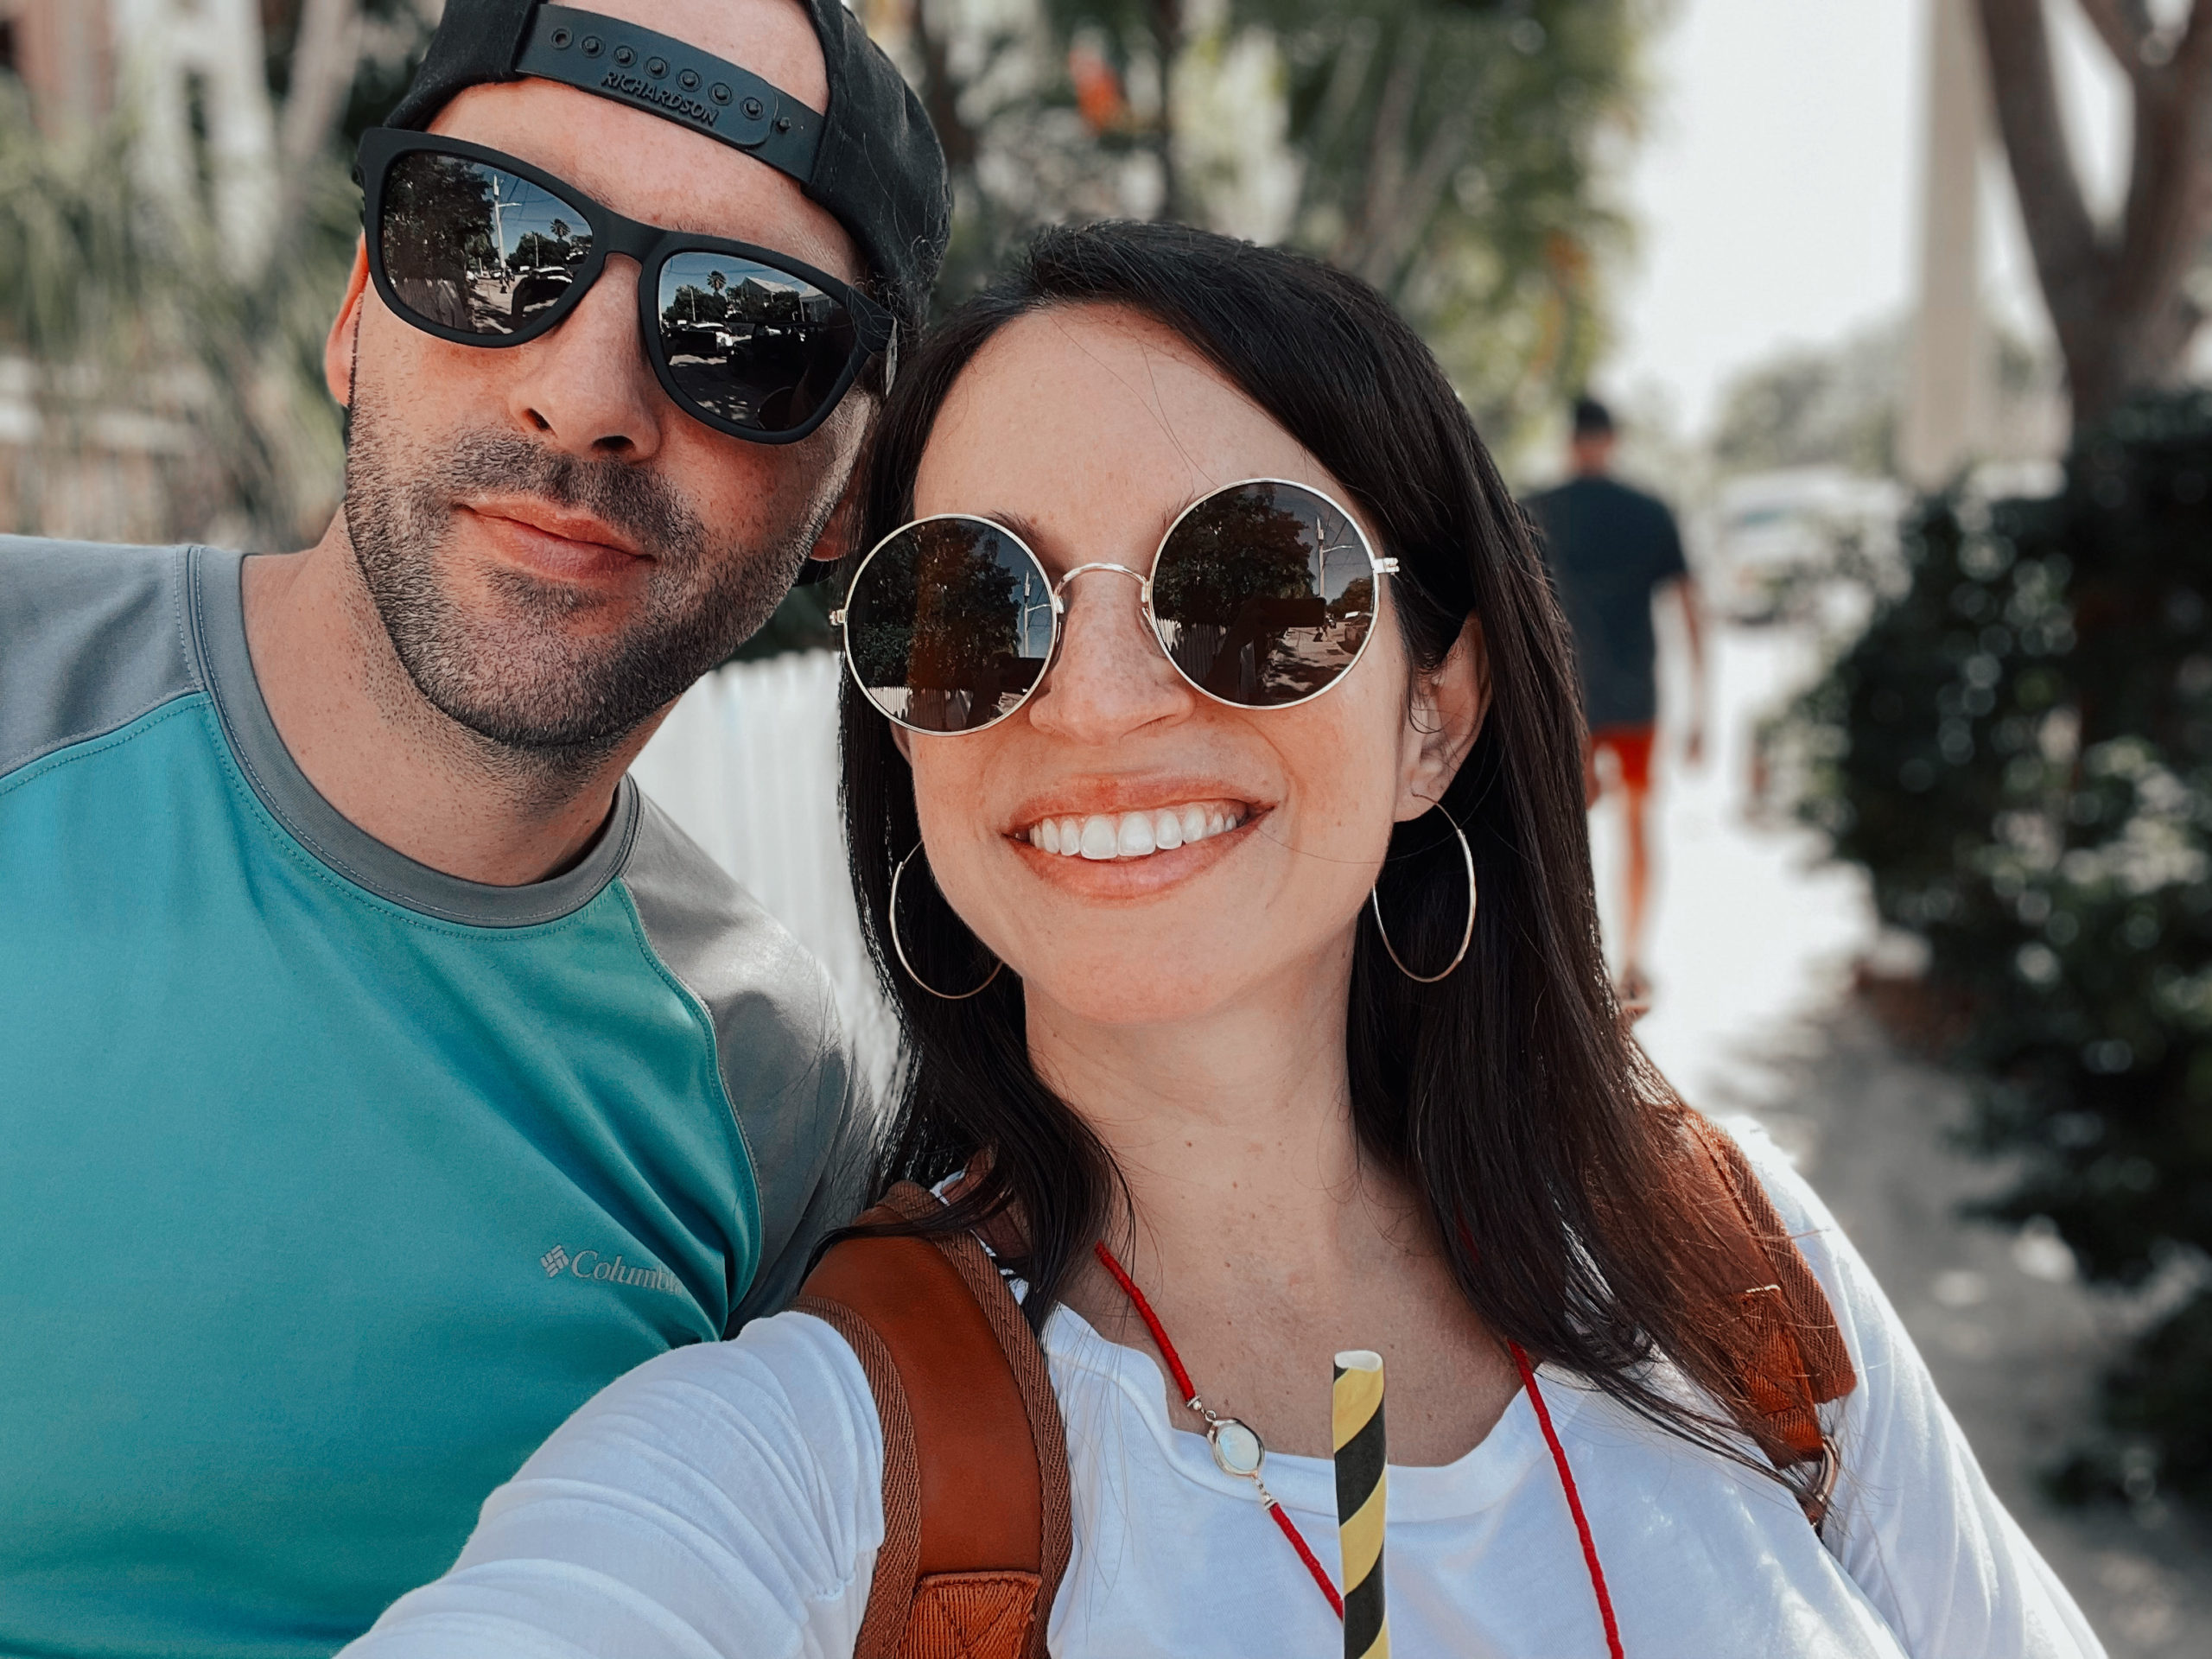 Our Key West Baby Moon Vlog: What we did & a NEW direction for us